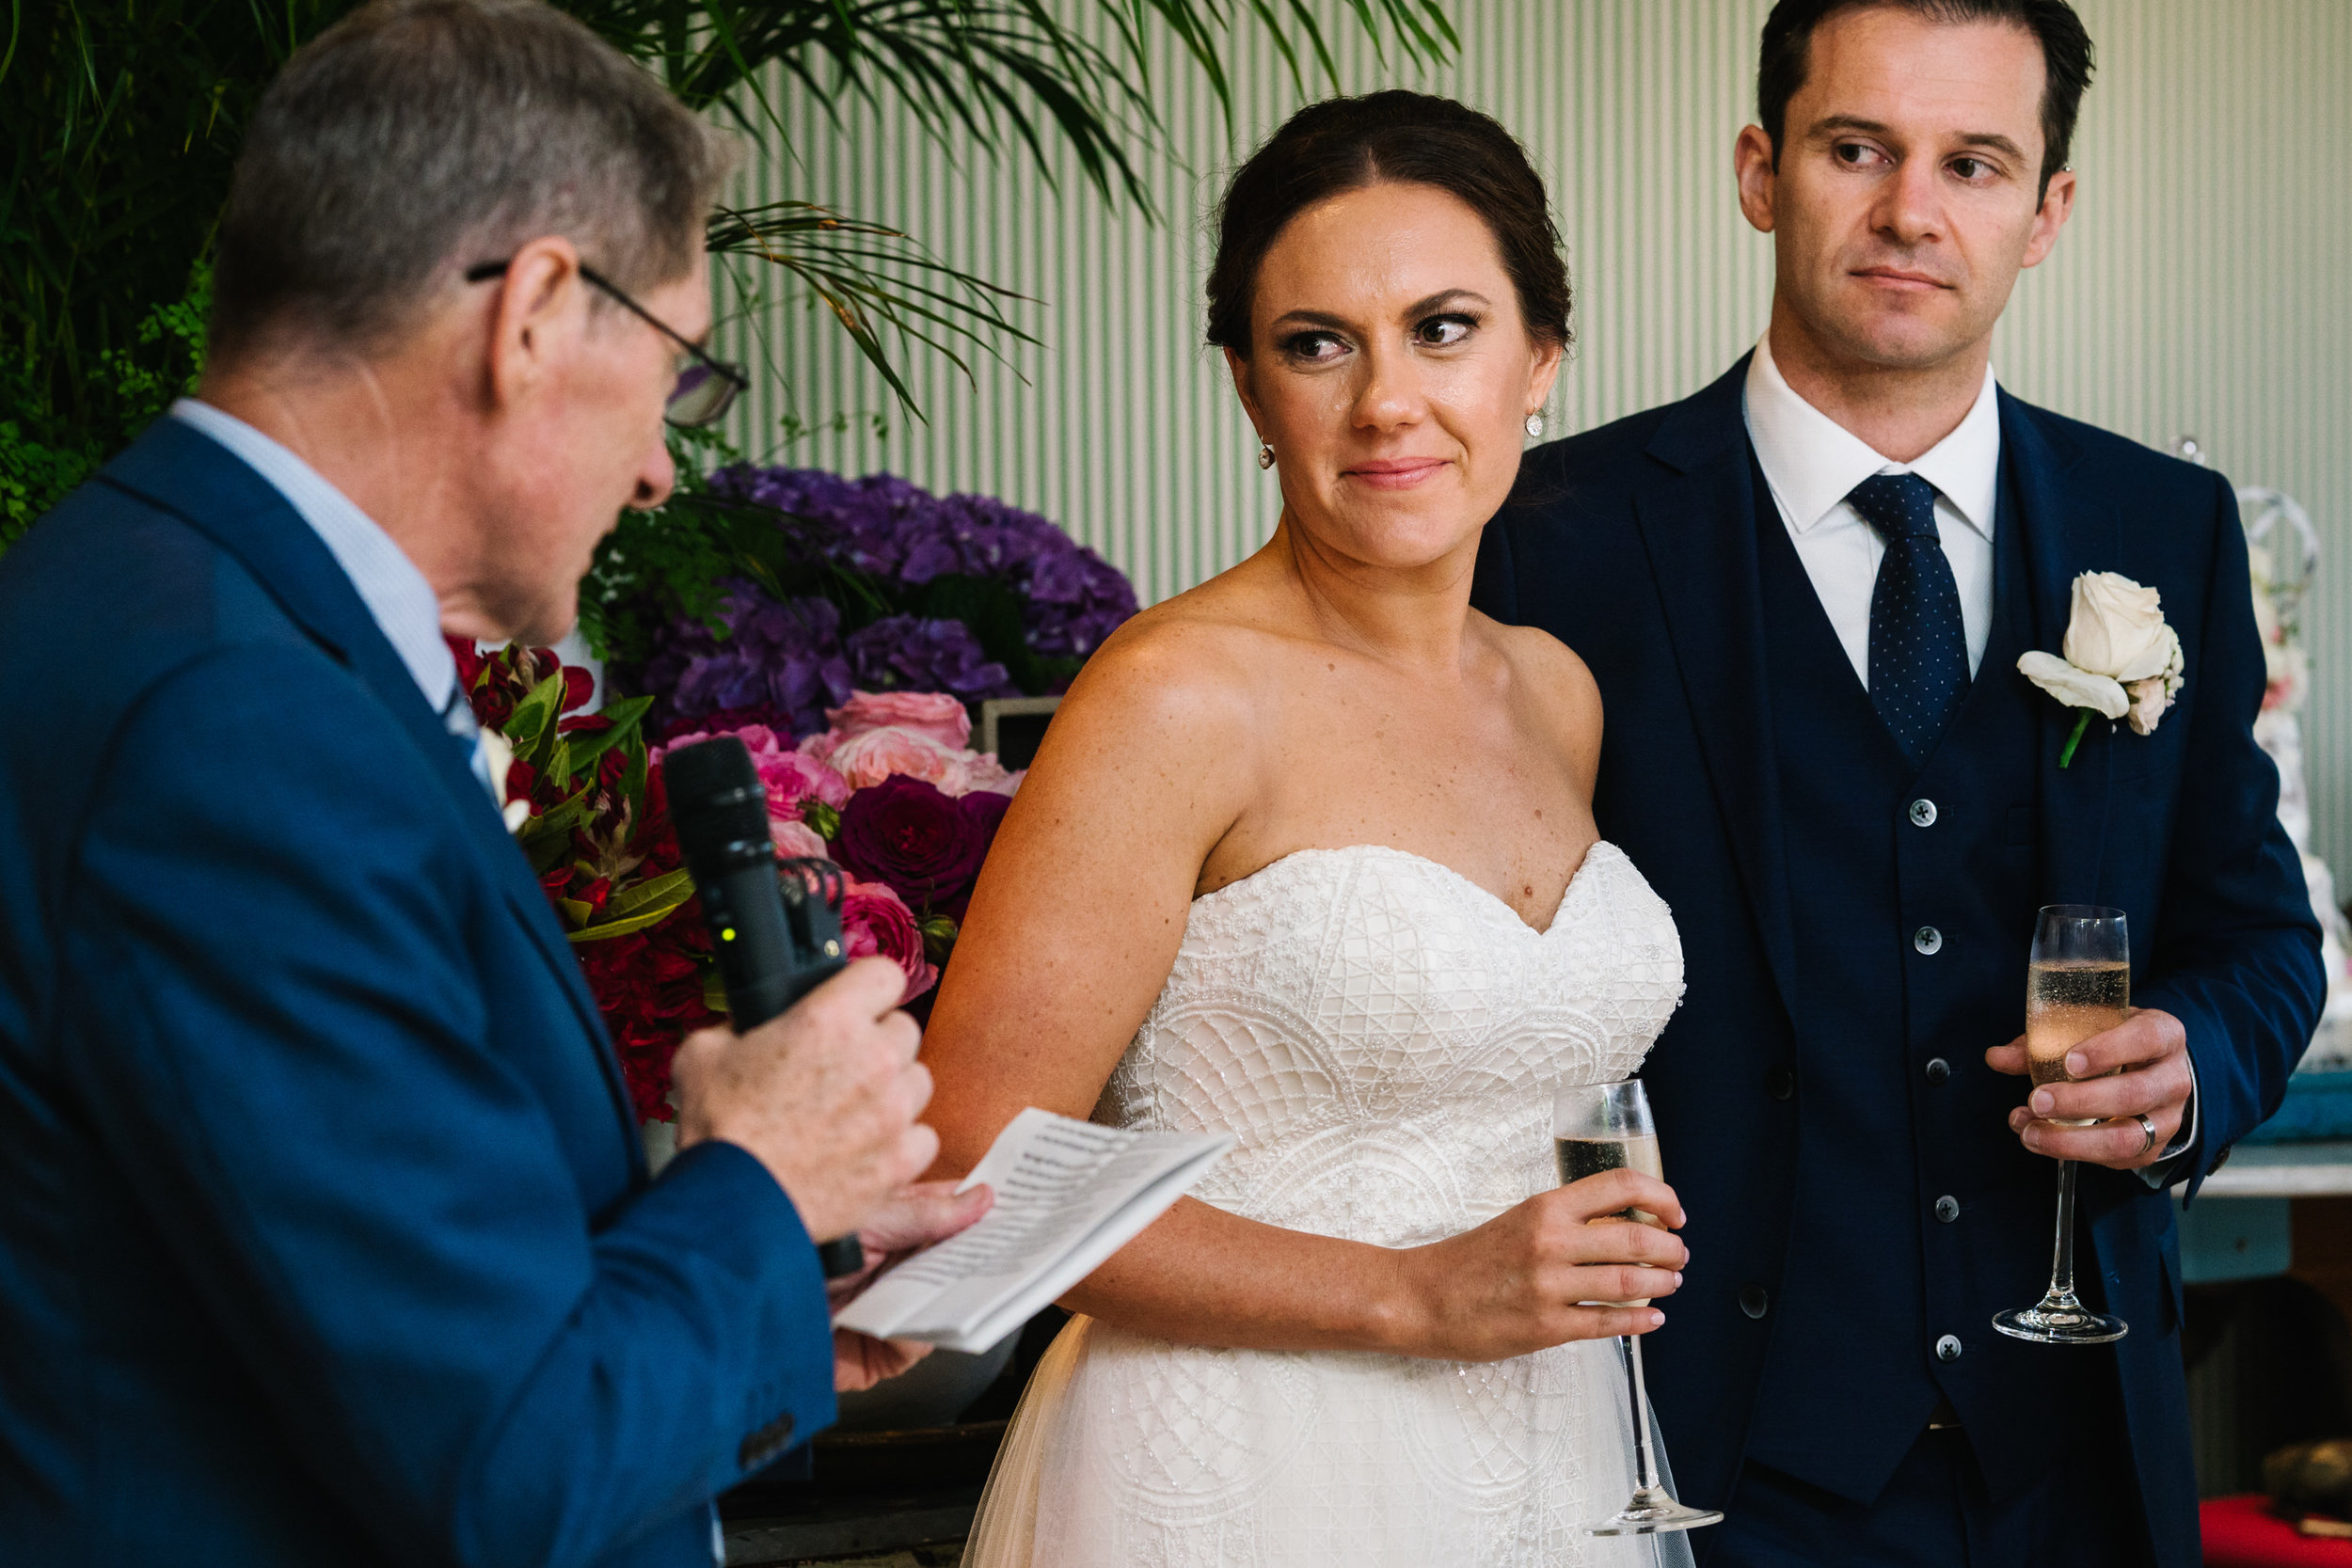 Bride looking at father during speech